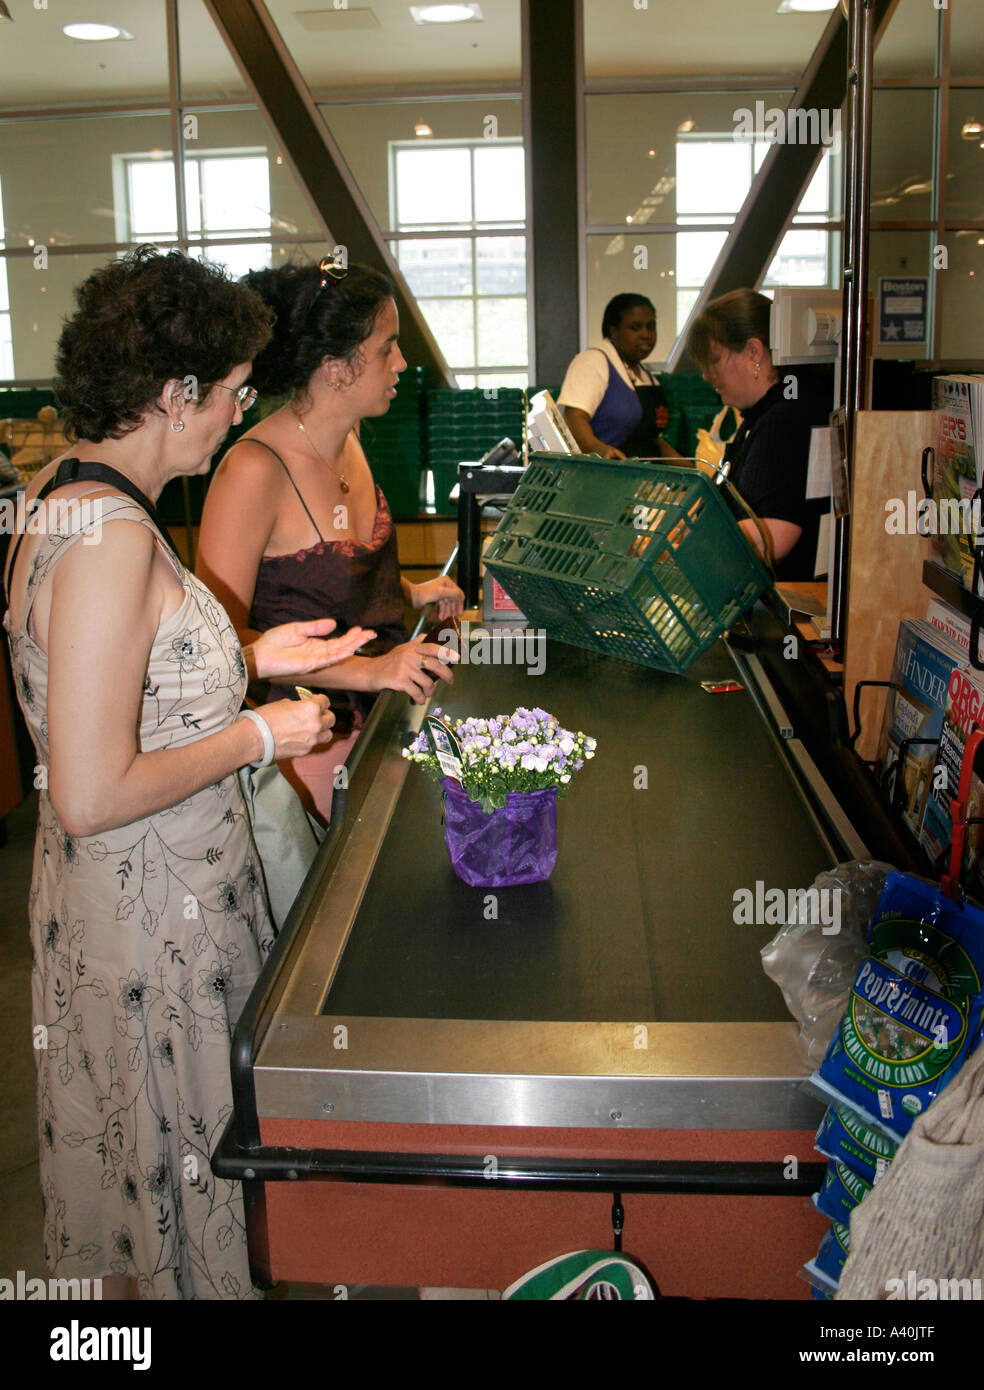 Women shopping in a market, a Mother and Daughter at the checkout after shopping in a USA food market Stock Photo